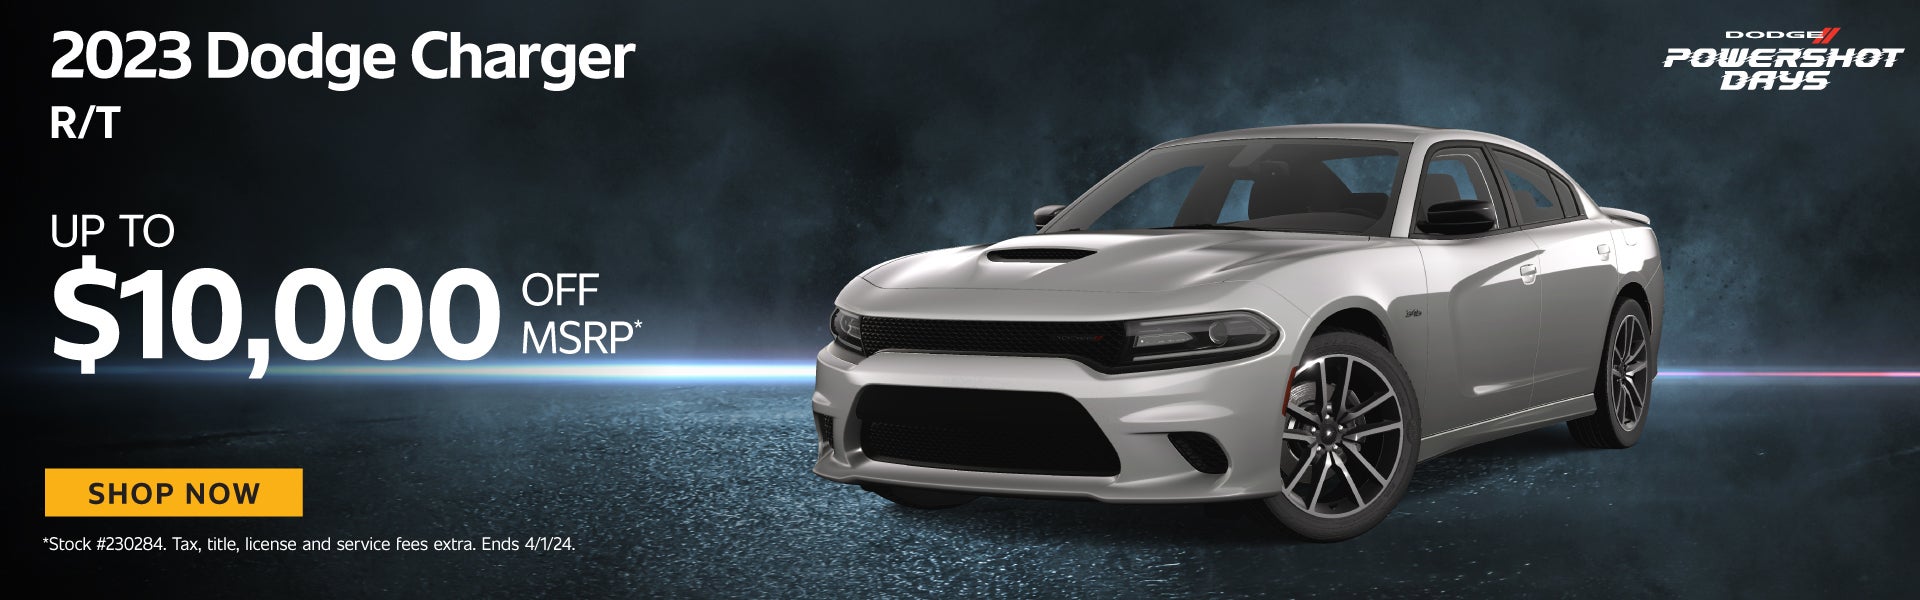 2023 Dodge Charger R/T Up to $10,000 Off MSRP